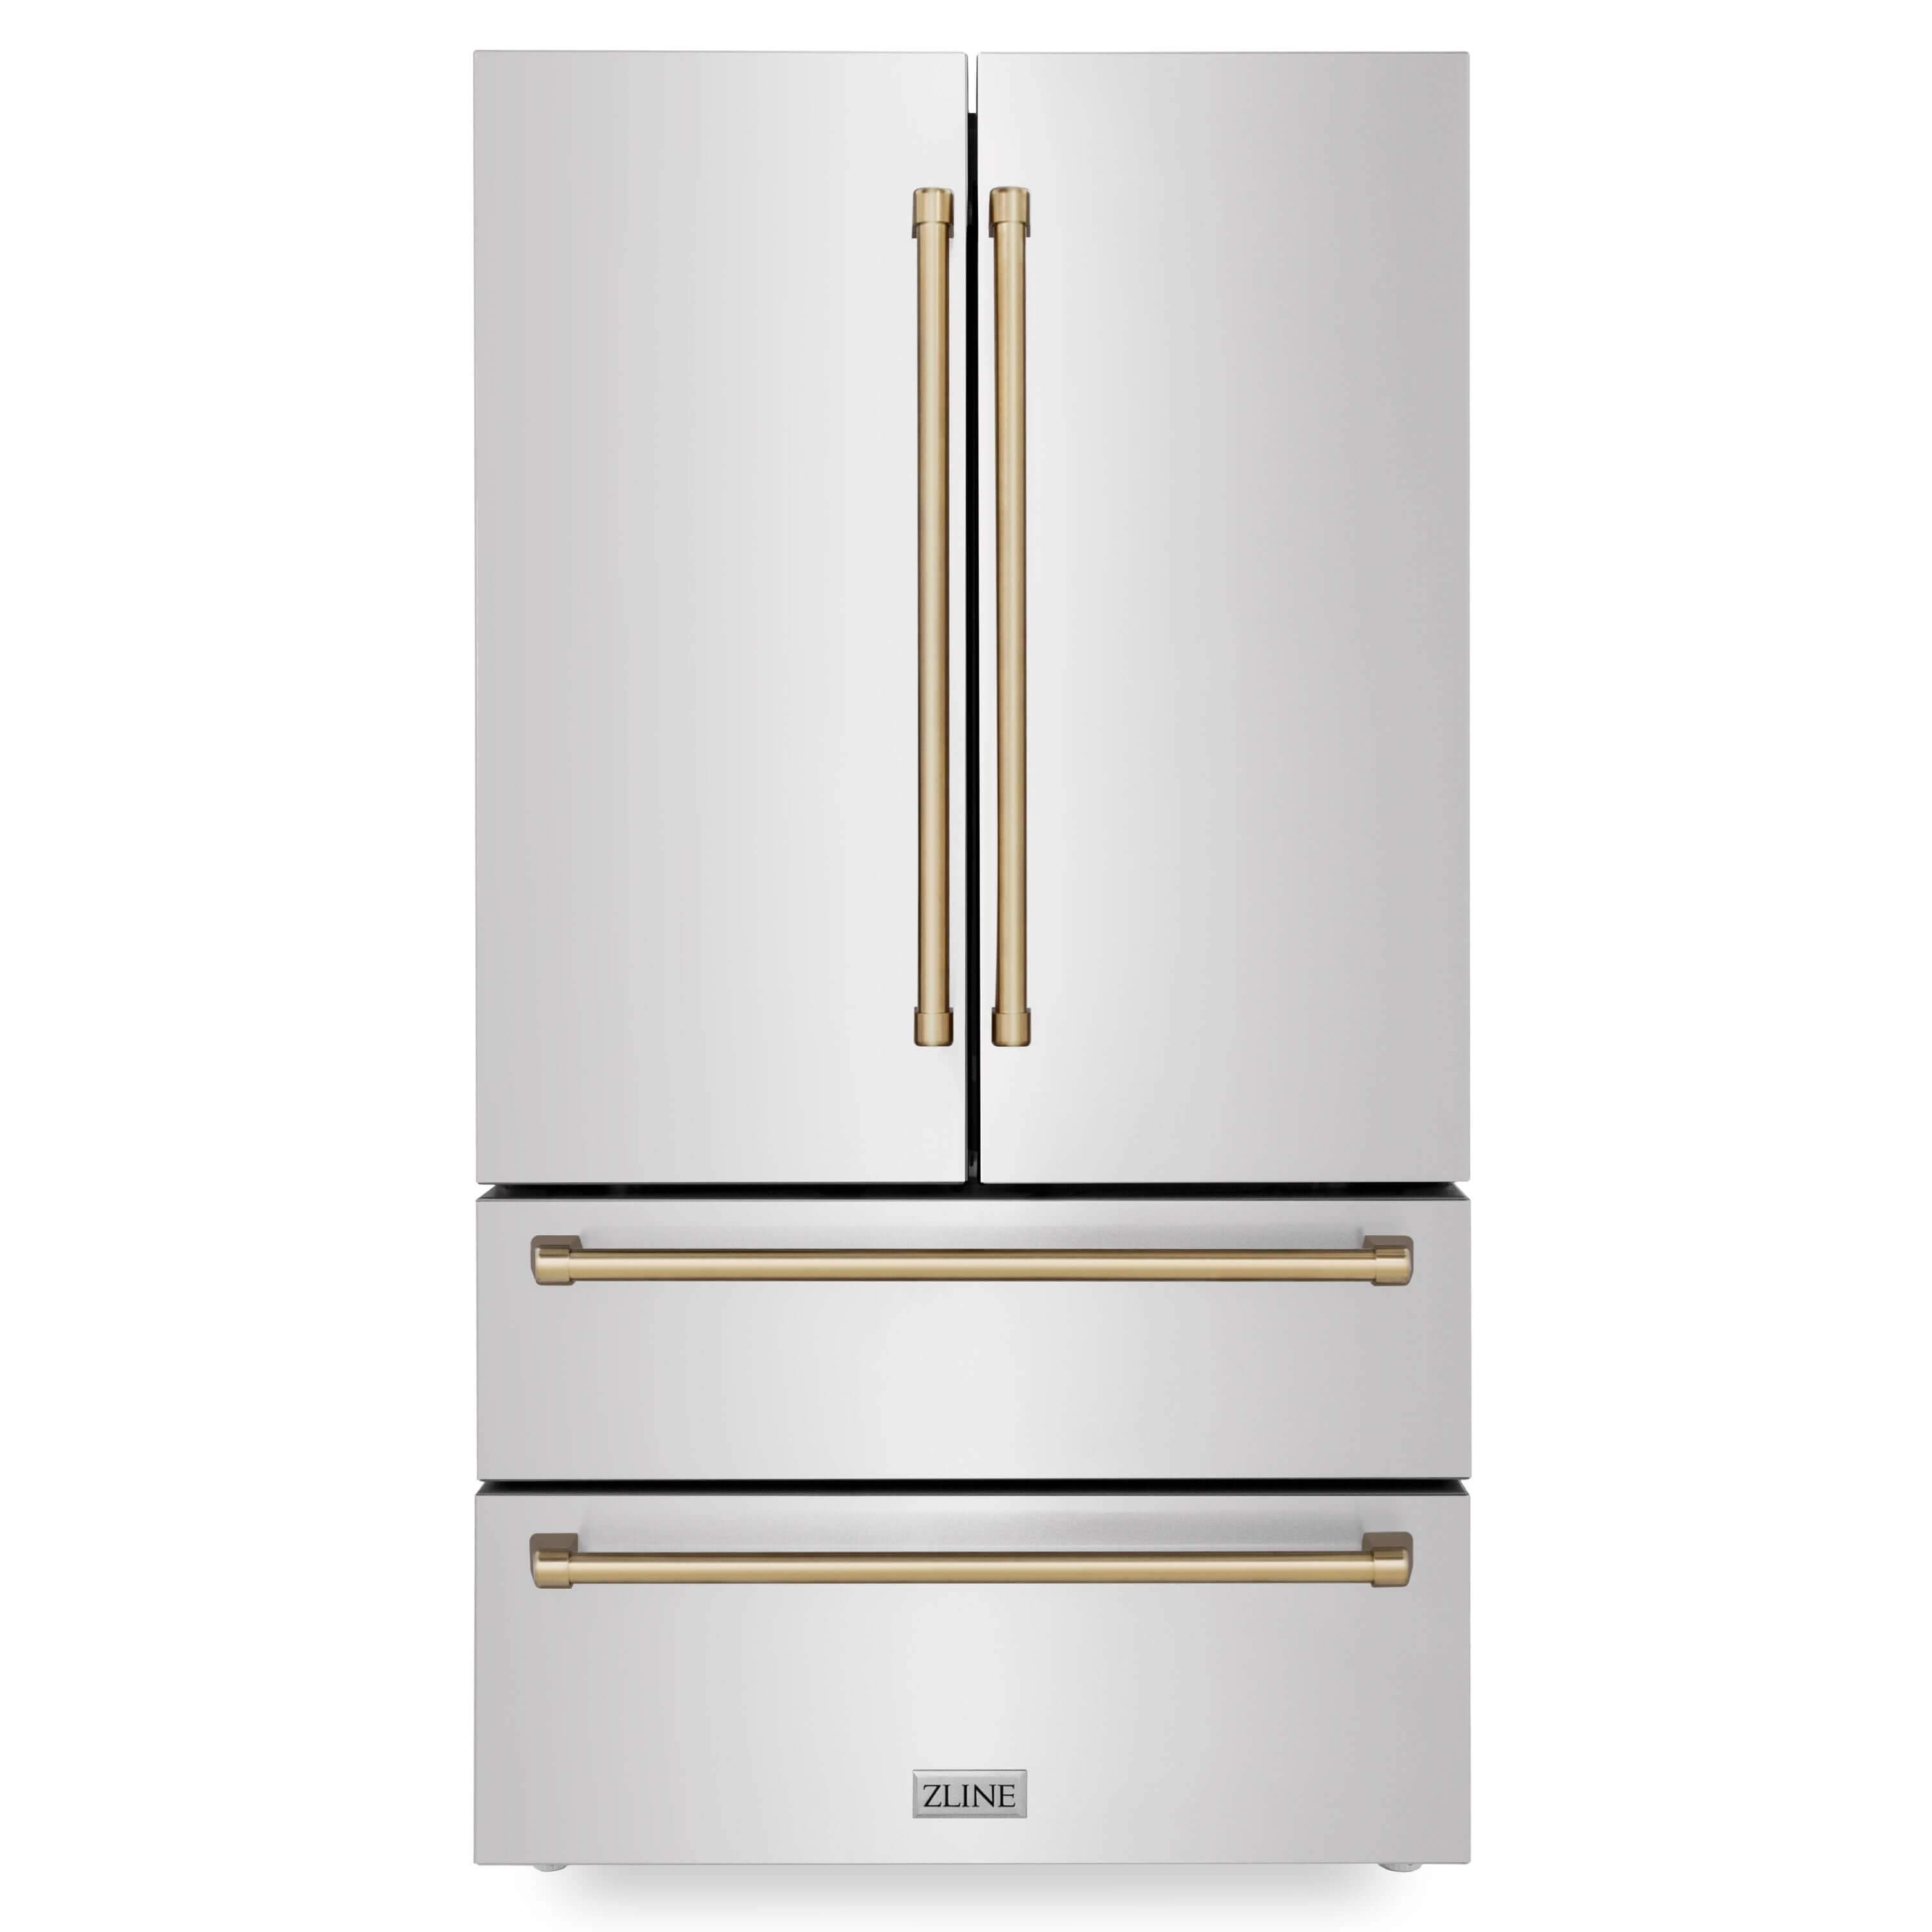 ZLINE 36 in. Autograph Edition 22.5 cu. ft Freestanding French Door Refrigerator with Ice Maker in Fingerprint Resistant Stainless Steel with Champagne Bronze Accents (RFMZ-36-CB)